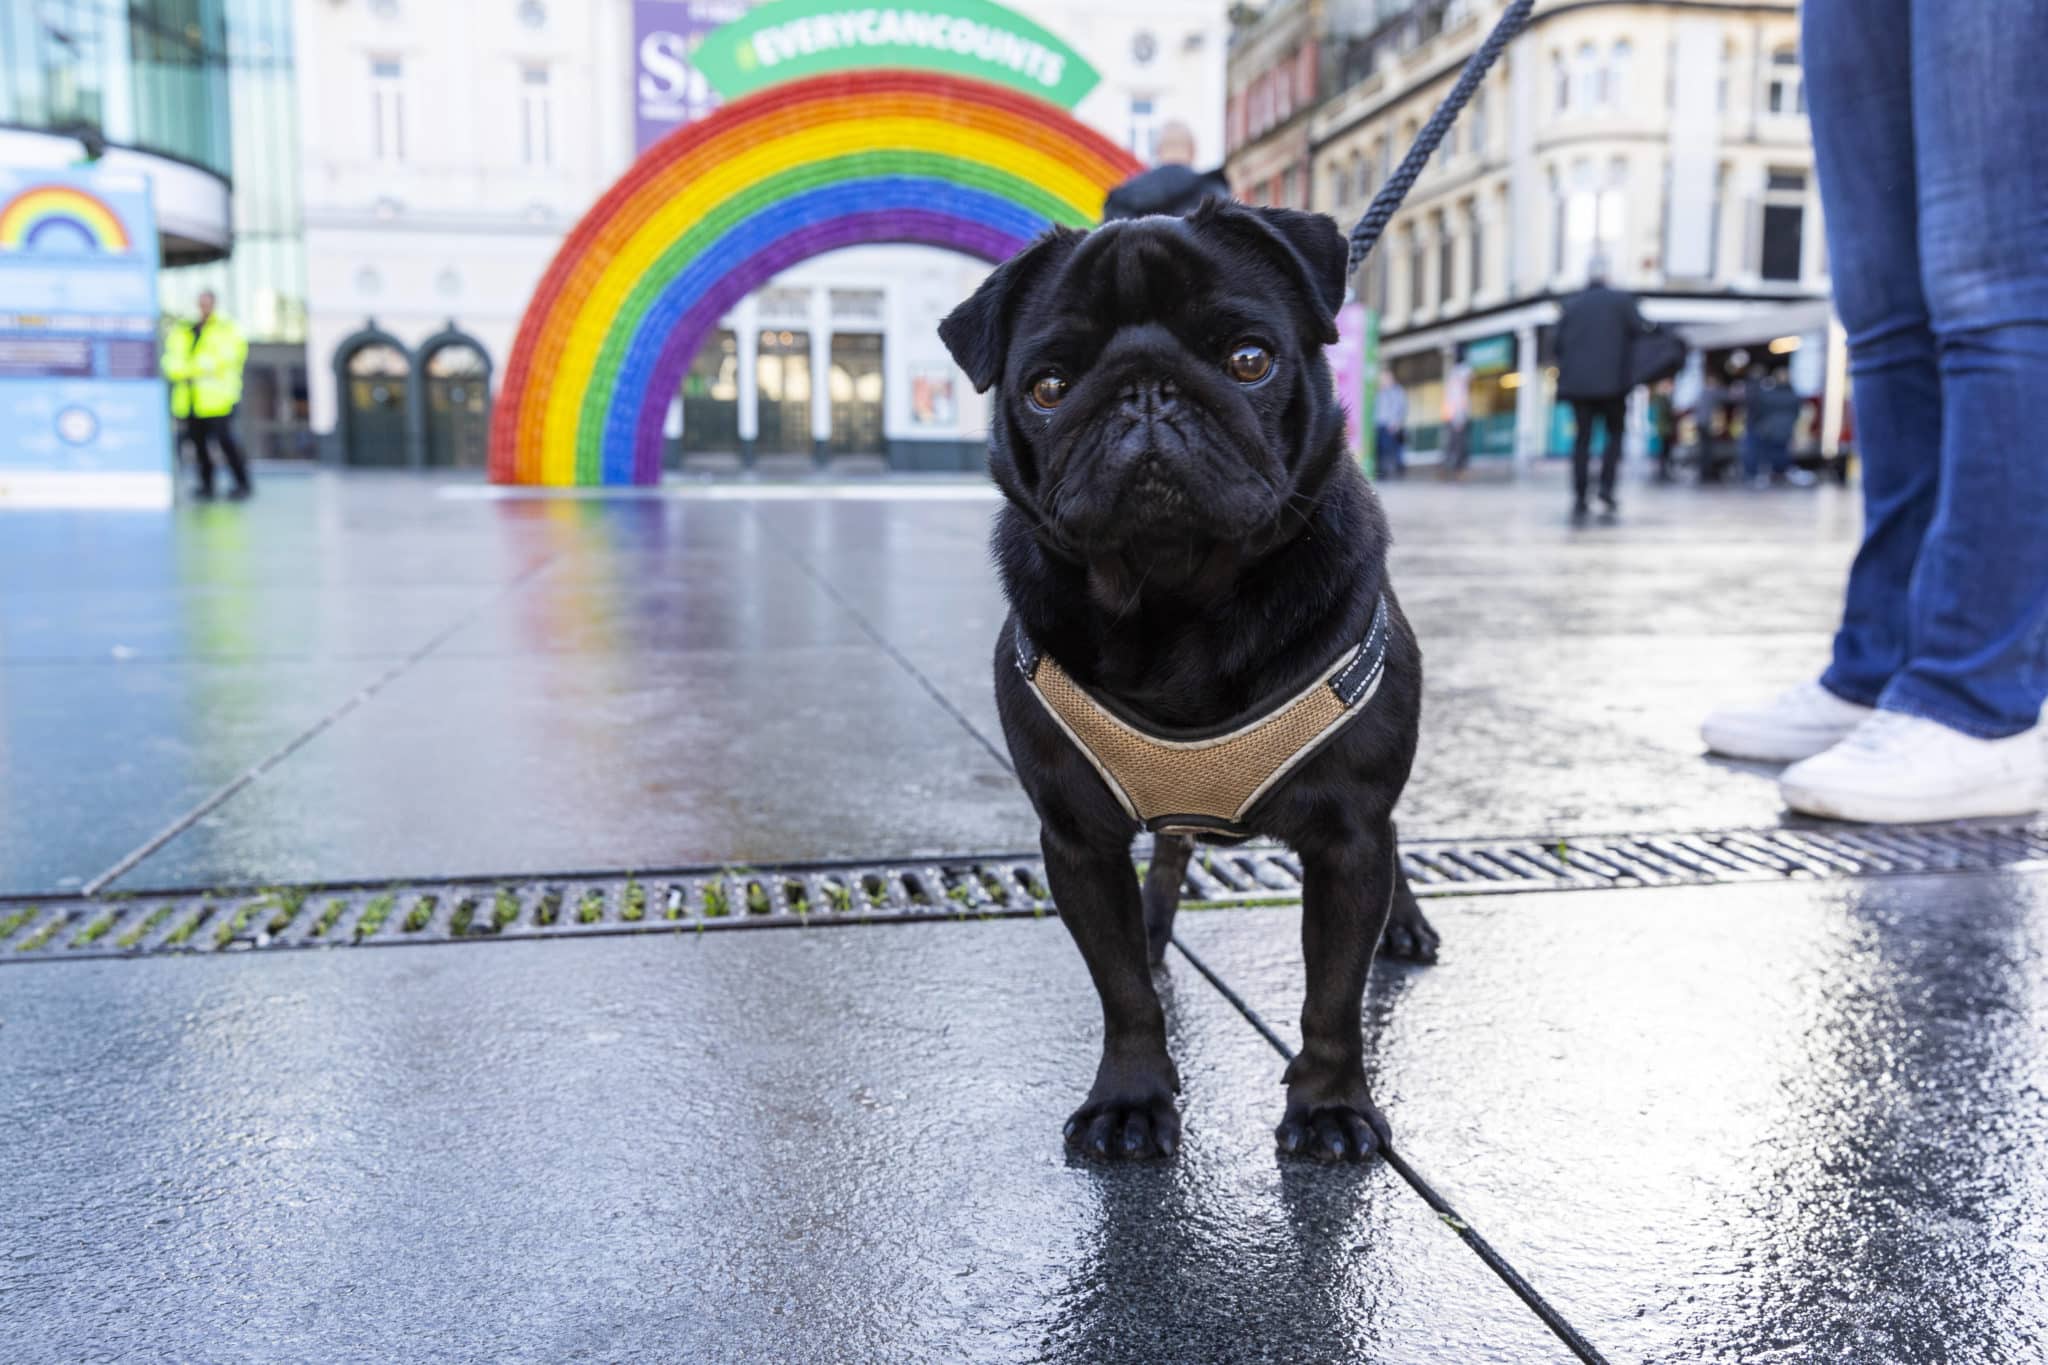 Bruno the black pug stands in front of the recycled rainbow in Liverpool city centre. 